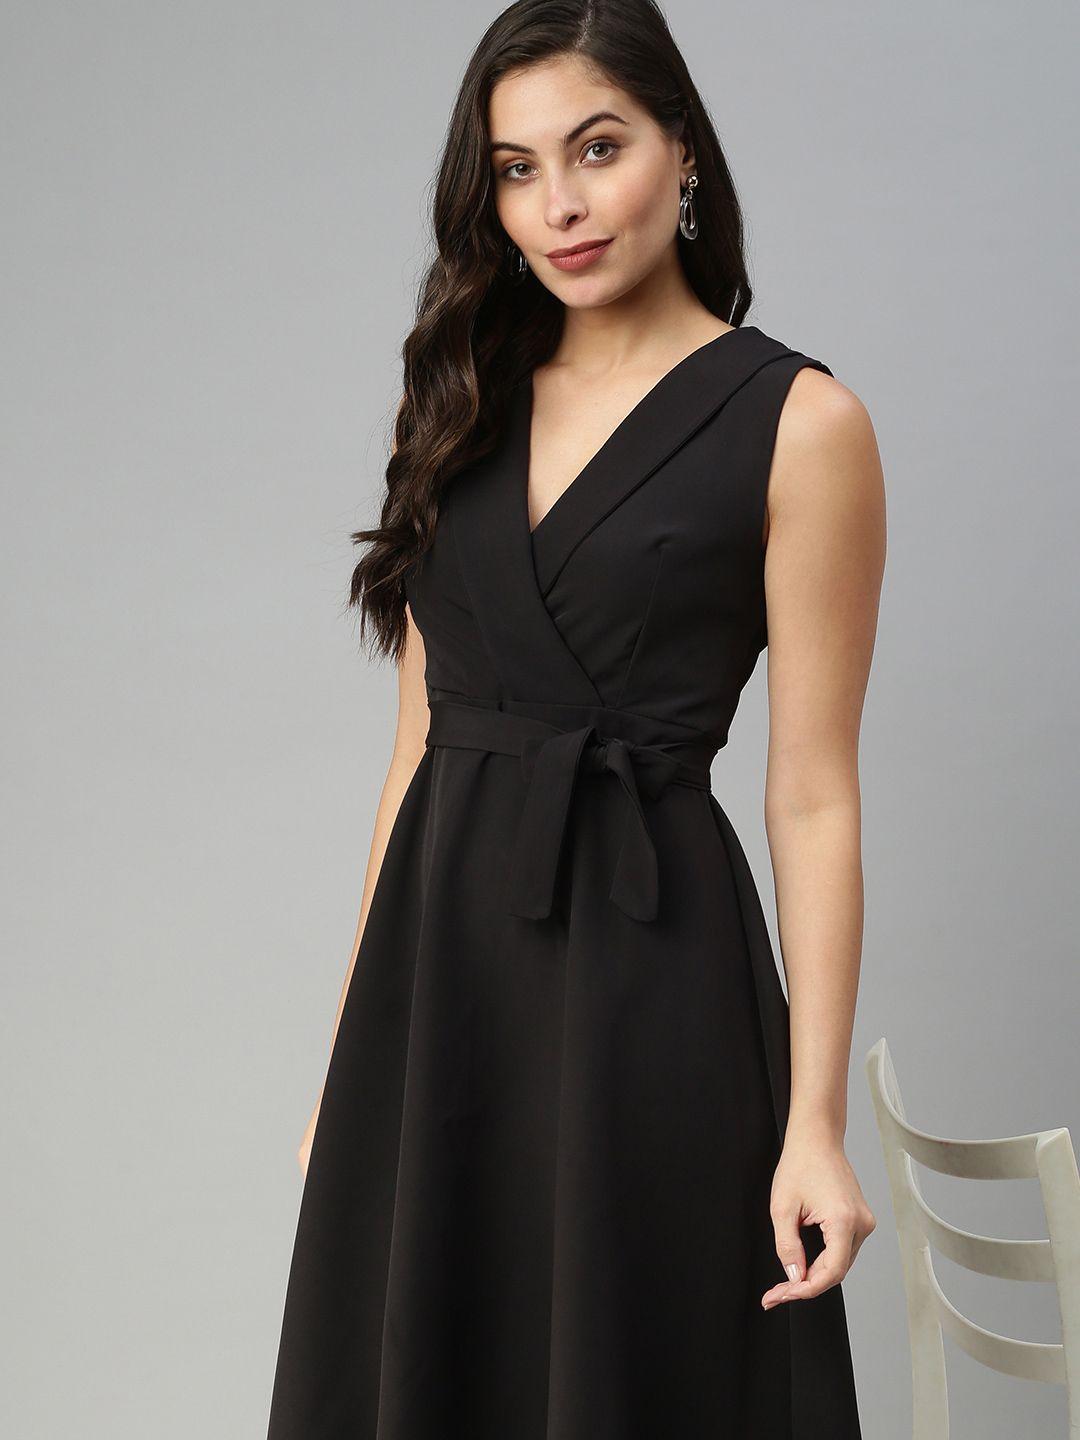 showoff-women-black-solid-fit-and-flare-dress